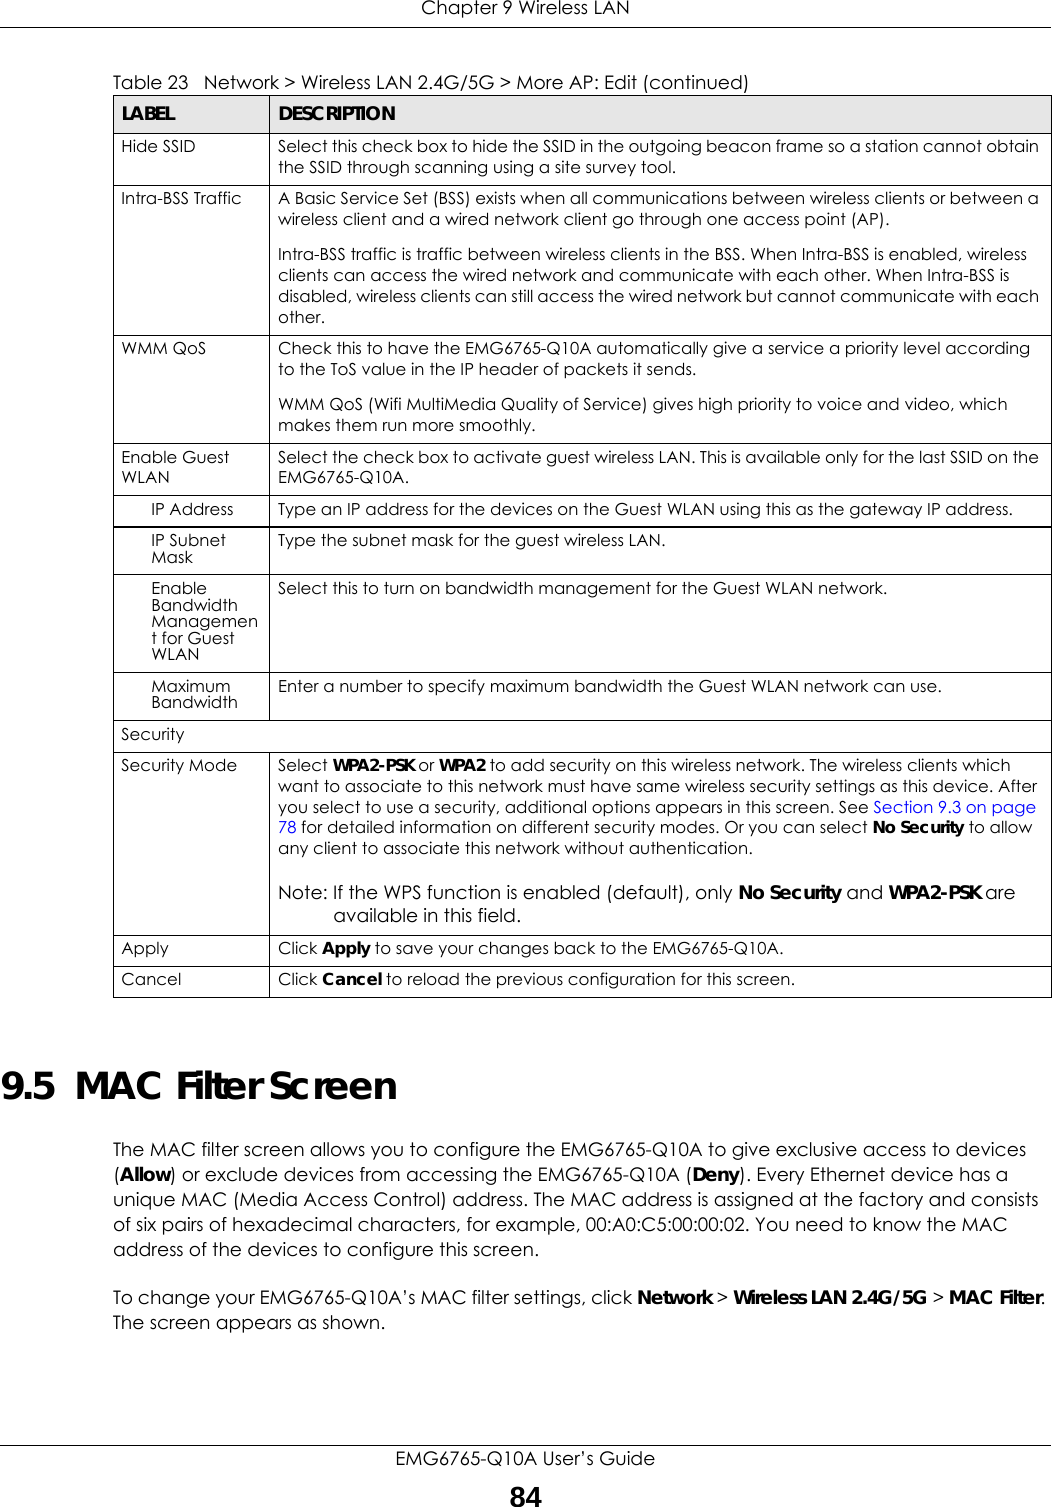 Chapter 9 Wireless LANEMG6765-Q10A User’s Guide849.5  MAC Filter Screen The MAC filter screen allows you to configure the EMG6765-Q10A to give exclusive access to devices (Allow) or exclude devices from accessing the EMG6765-Q10A (Deny). Every Ethernet device has a unique MAC (Media Access Control) address. The MAC address is assigned at the factory and consists of six pairs of hexadecimal characters, for example, 00:A0:C5:00:00:02. You need to know the MAC address of the devices to configure this screen.To change your EMG6765-Q10A’s MAC filter settings, click Network &gt; Wireless LAN 2.4G/5G &gt; MAC Filter. The screen appears as shown.Hide SSID Select this check box to hide the SSID in the outgoing beacon frame so a station cannot obtain the SSID through scanning using a site survey tool.Intra-BSS Traffic A Basic Service Set (BSS) exists when all communications between wireless clients or between a wireless client and a wired network client go through one access point (AP). Intra-BSS traffic is traffic between wireless clients in the BSS. When Intra-BSS is enabled, wireless clients can access the wired network and communicate with each other. When Intra-BSS is disabled, wireless clients can still access the wired network but cannot communicate with each other.WMM QoS Check this to have the EMG6765-Q10A automatically give a service a priority level according to the ToS value in the IP header of packets it sends. WMM QoS (Wifi MultiMedia Quality of Service) gives high priority to voice and video, which makes them run more smoothly.Enable Guest WLANSelect the check box to activate guest wireless LAN. This is available only for the last SSID on the EMG6765-Q10A.IP Address Type an IP address for the devices on the Guest WLAN using this as the gateway IP address.IP Subnet Mask  Type the subnet mask for the guest wireless LAN.Enable Bandwidth Management for Guest WLAN Select this to turn on bandwidth management for the Guest WLAN network.Maximum Bandwidth  Enter a number to specify maximum bandwidth the Guest WLAN network can use.SecuritySecurity Mode Select WPA2-PSK or WPA2 to add security on this wireless network. The wireless clients which want to associate to this network must have same wireless security settings as this device. After you select to use a security, additional options appears in this screen. See Section 9.3 on page 78 for detailed information on different security modes. Or you can select No Security to allow any client to associate this network without authentication.Note: If the WPS function is enabled (default), only No Security and WPA2-PSK are available in this field.Apply Click Apply to save your changes back to the EMG6765-Q10A.Cancel Click Cancel to reload the previous configuration for this screen.Table 23   Network &gt; Wireless LAN 2.4G/5G &gt; More AP: Edit (continued)LABEL DESCRIPTION